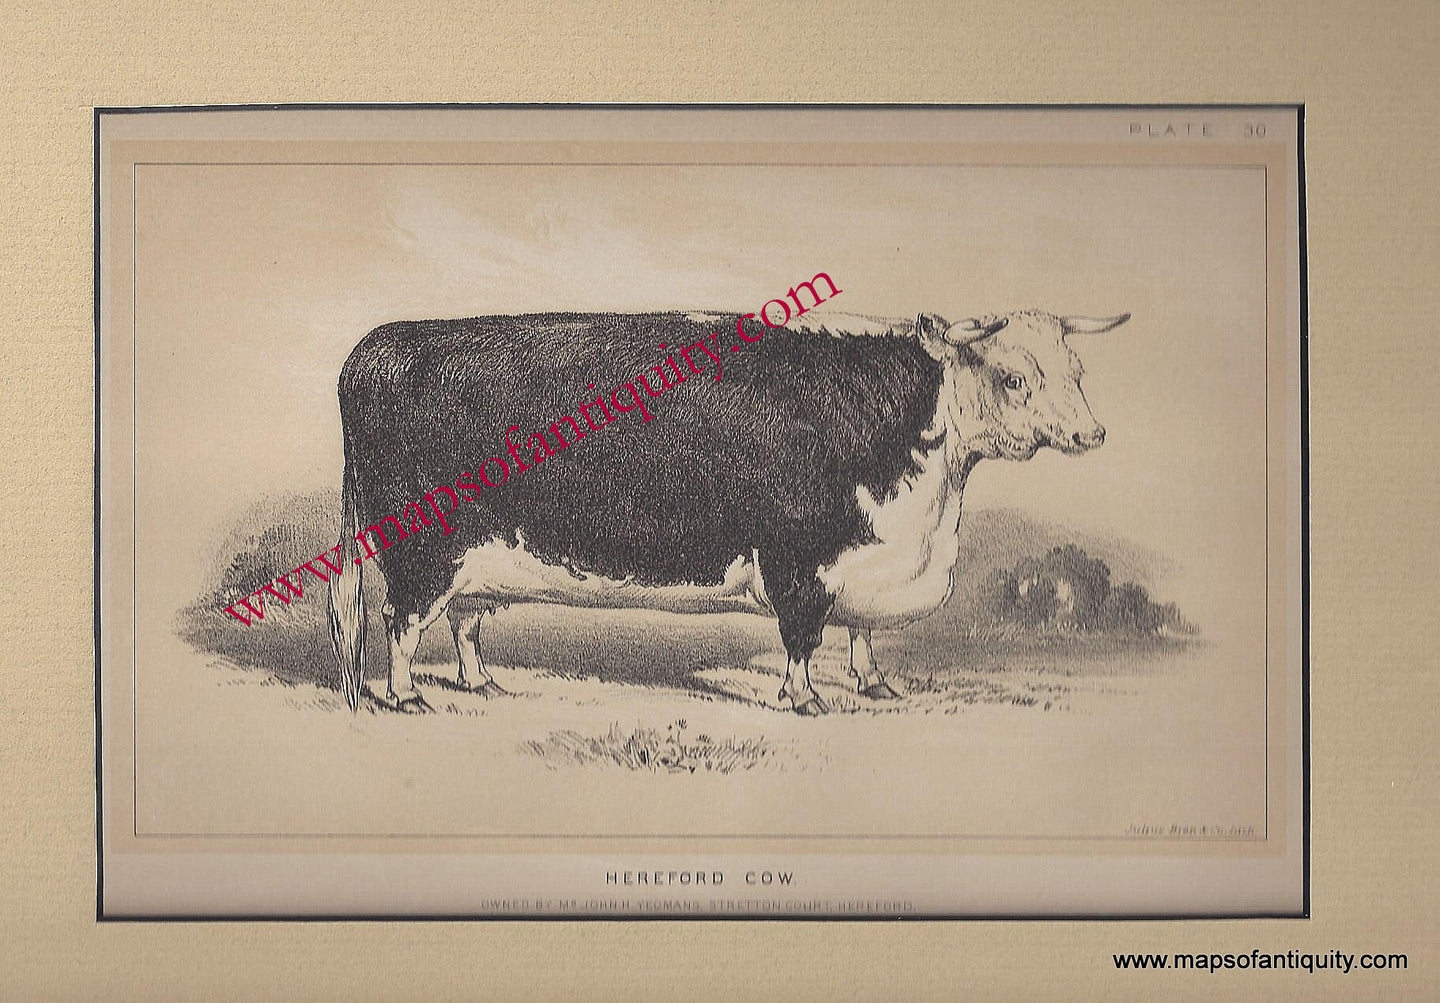 Antique-Print-Hereford-Cow-**********-Natural-History-Prints--1887-Bien-Maps-Of-Antiquity